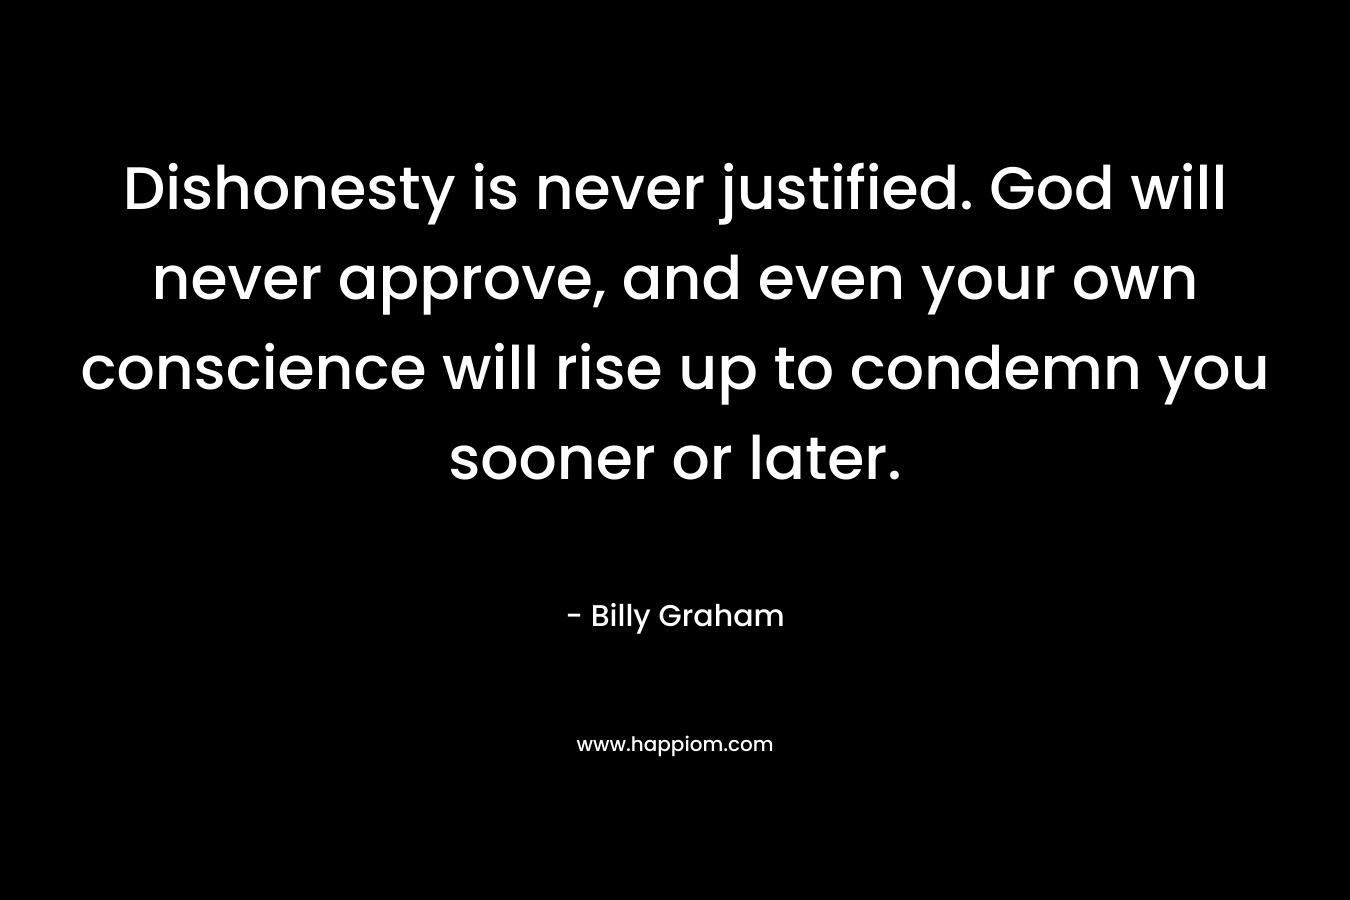 Dishonesty is never justified. God will never approve, and even your own conscience will rise up to condemn you sooner or later. – Billy Graham